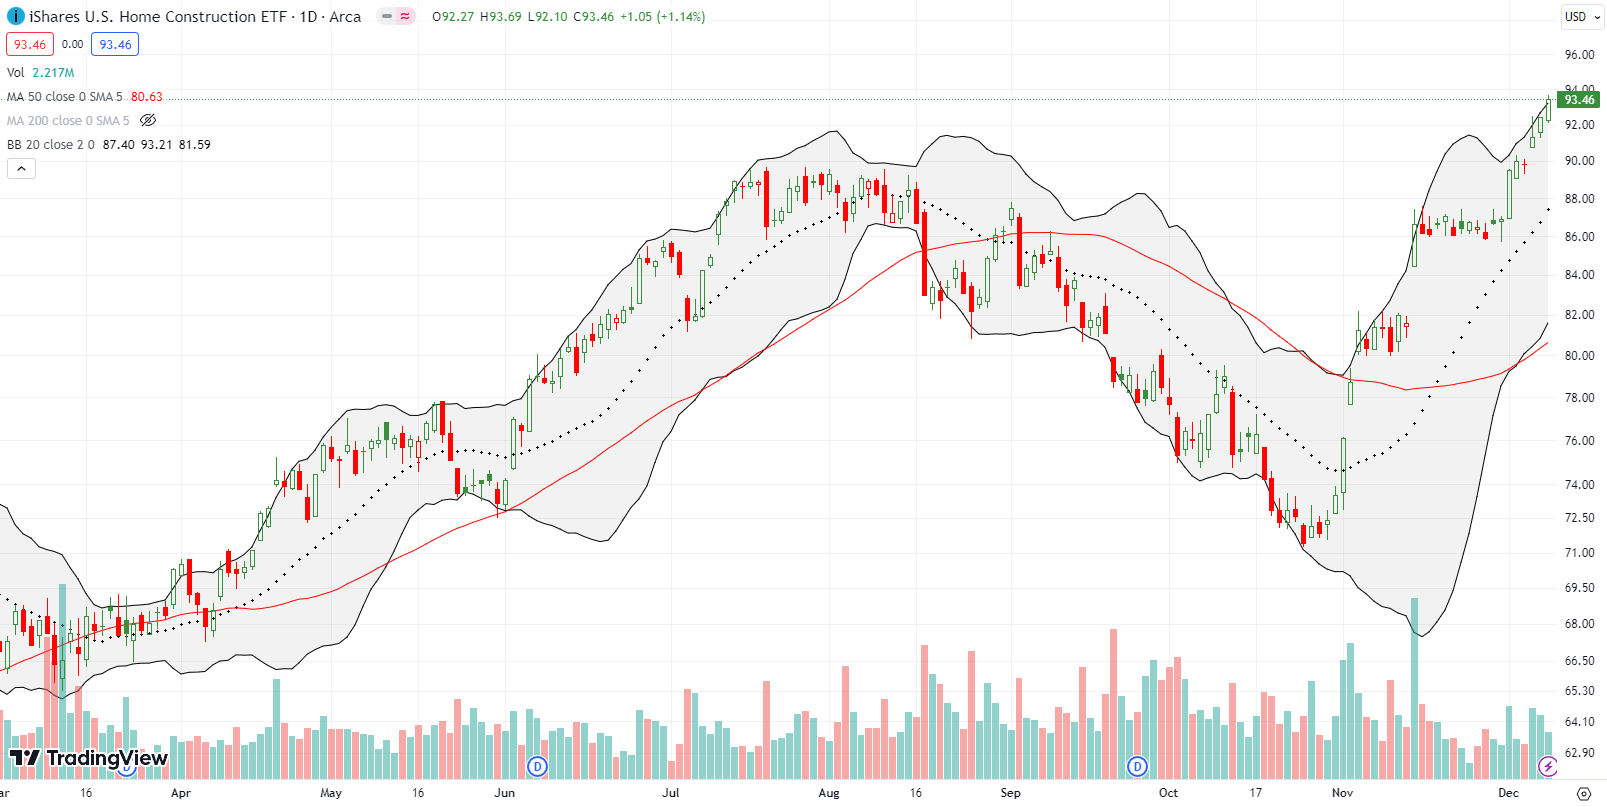 iShares US Home Construction ETF (ITB) continued a steady uptrend, reaching an all time high.